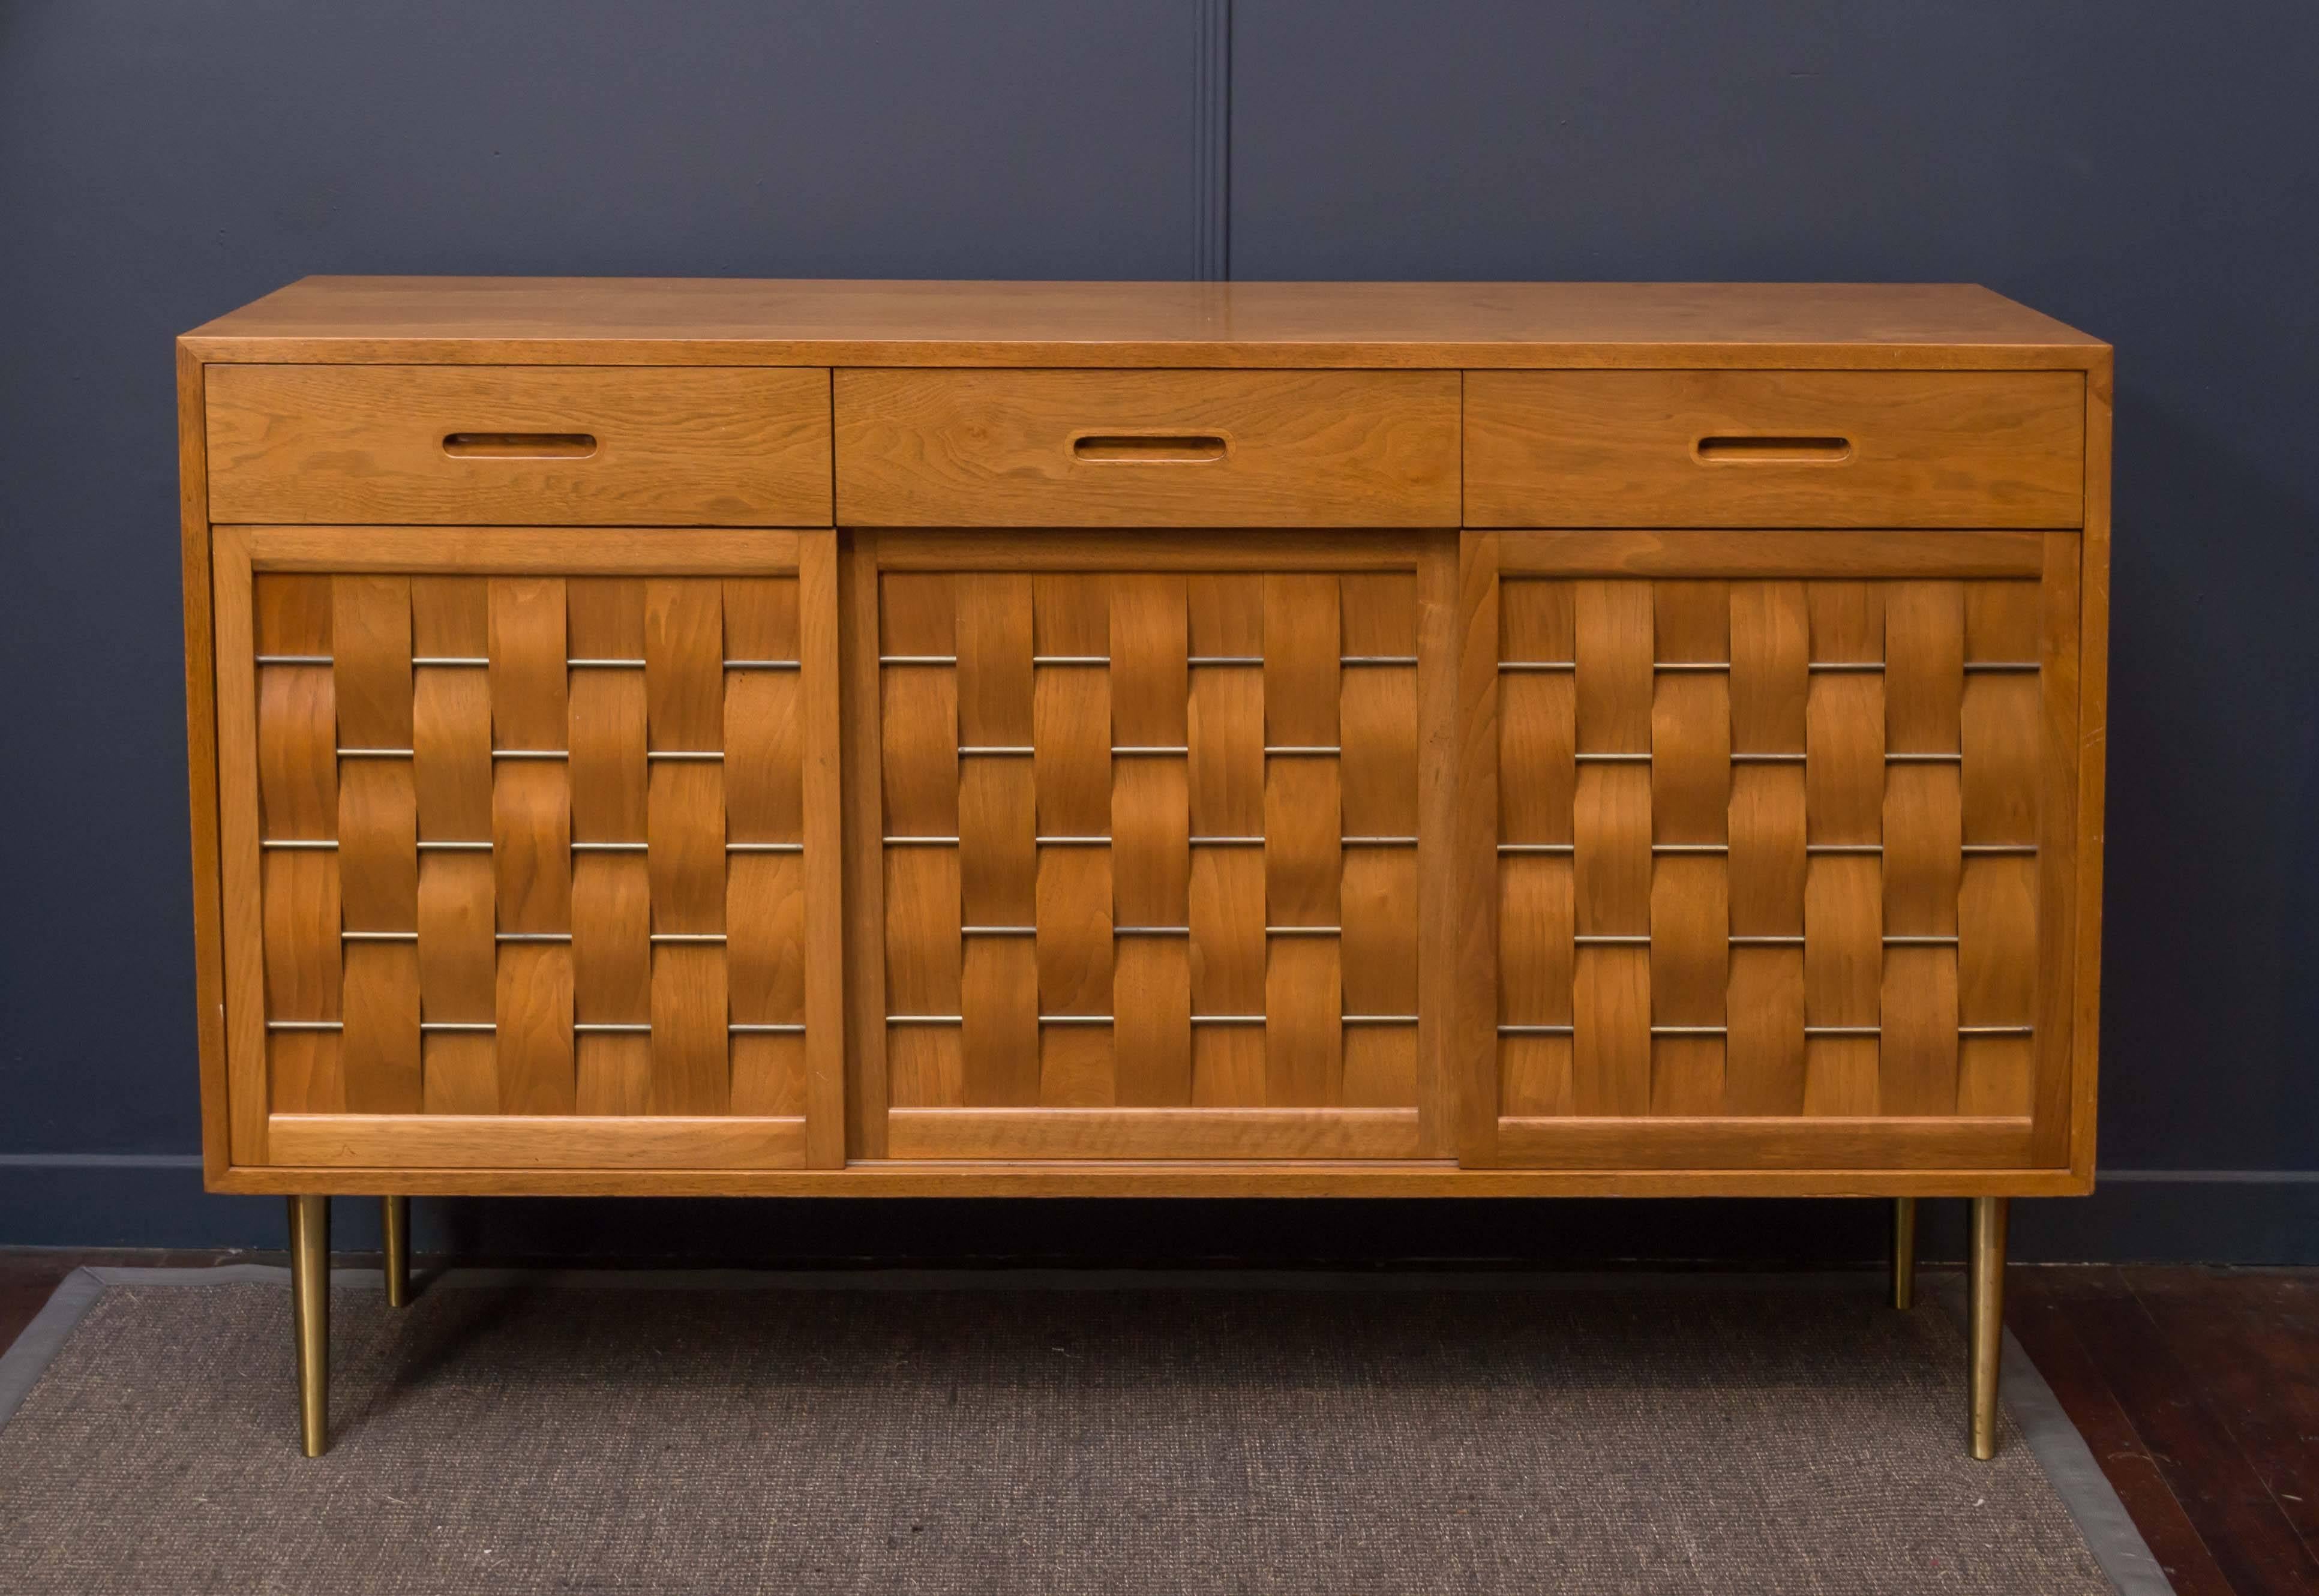 Edward Wormley design credenza for Dunbar Furniture Co. Three sliding doors with fitted interiors on original telescoping solid brass legs. 
Excellent original condition, labeled.